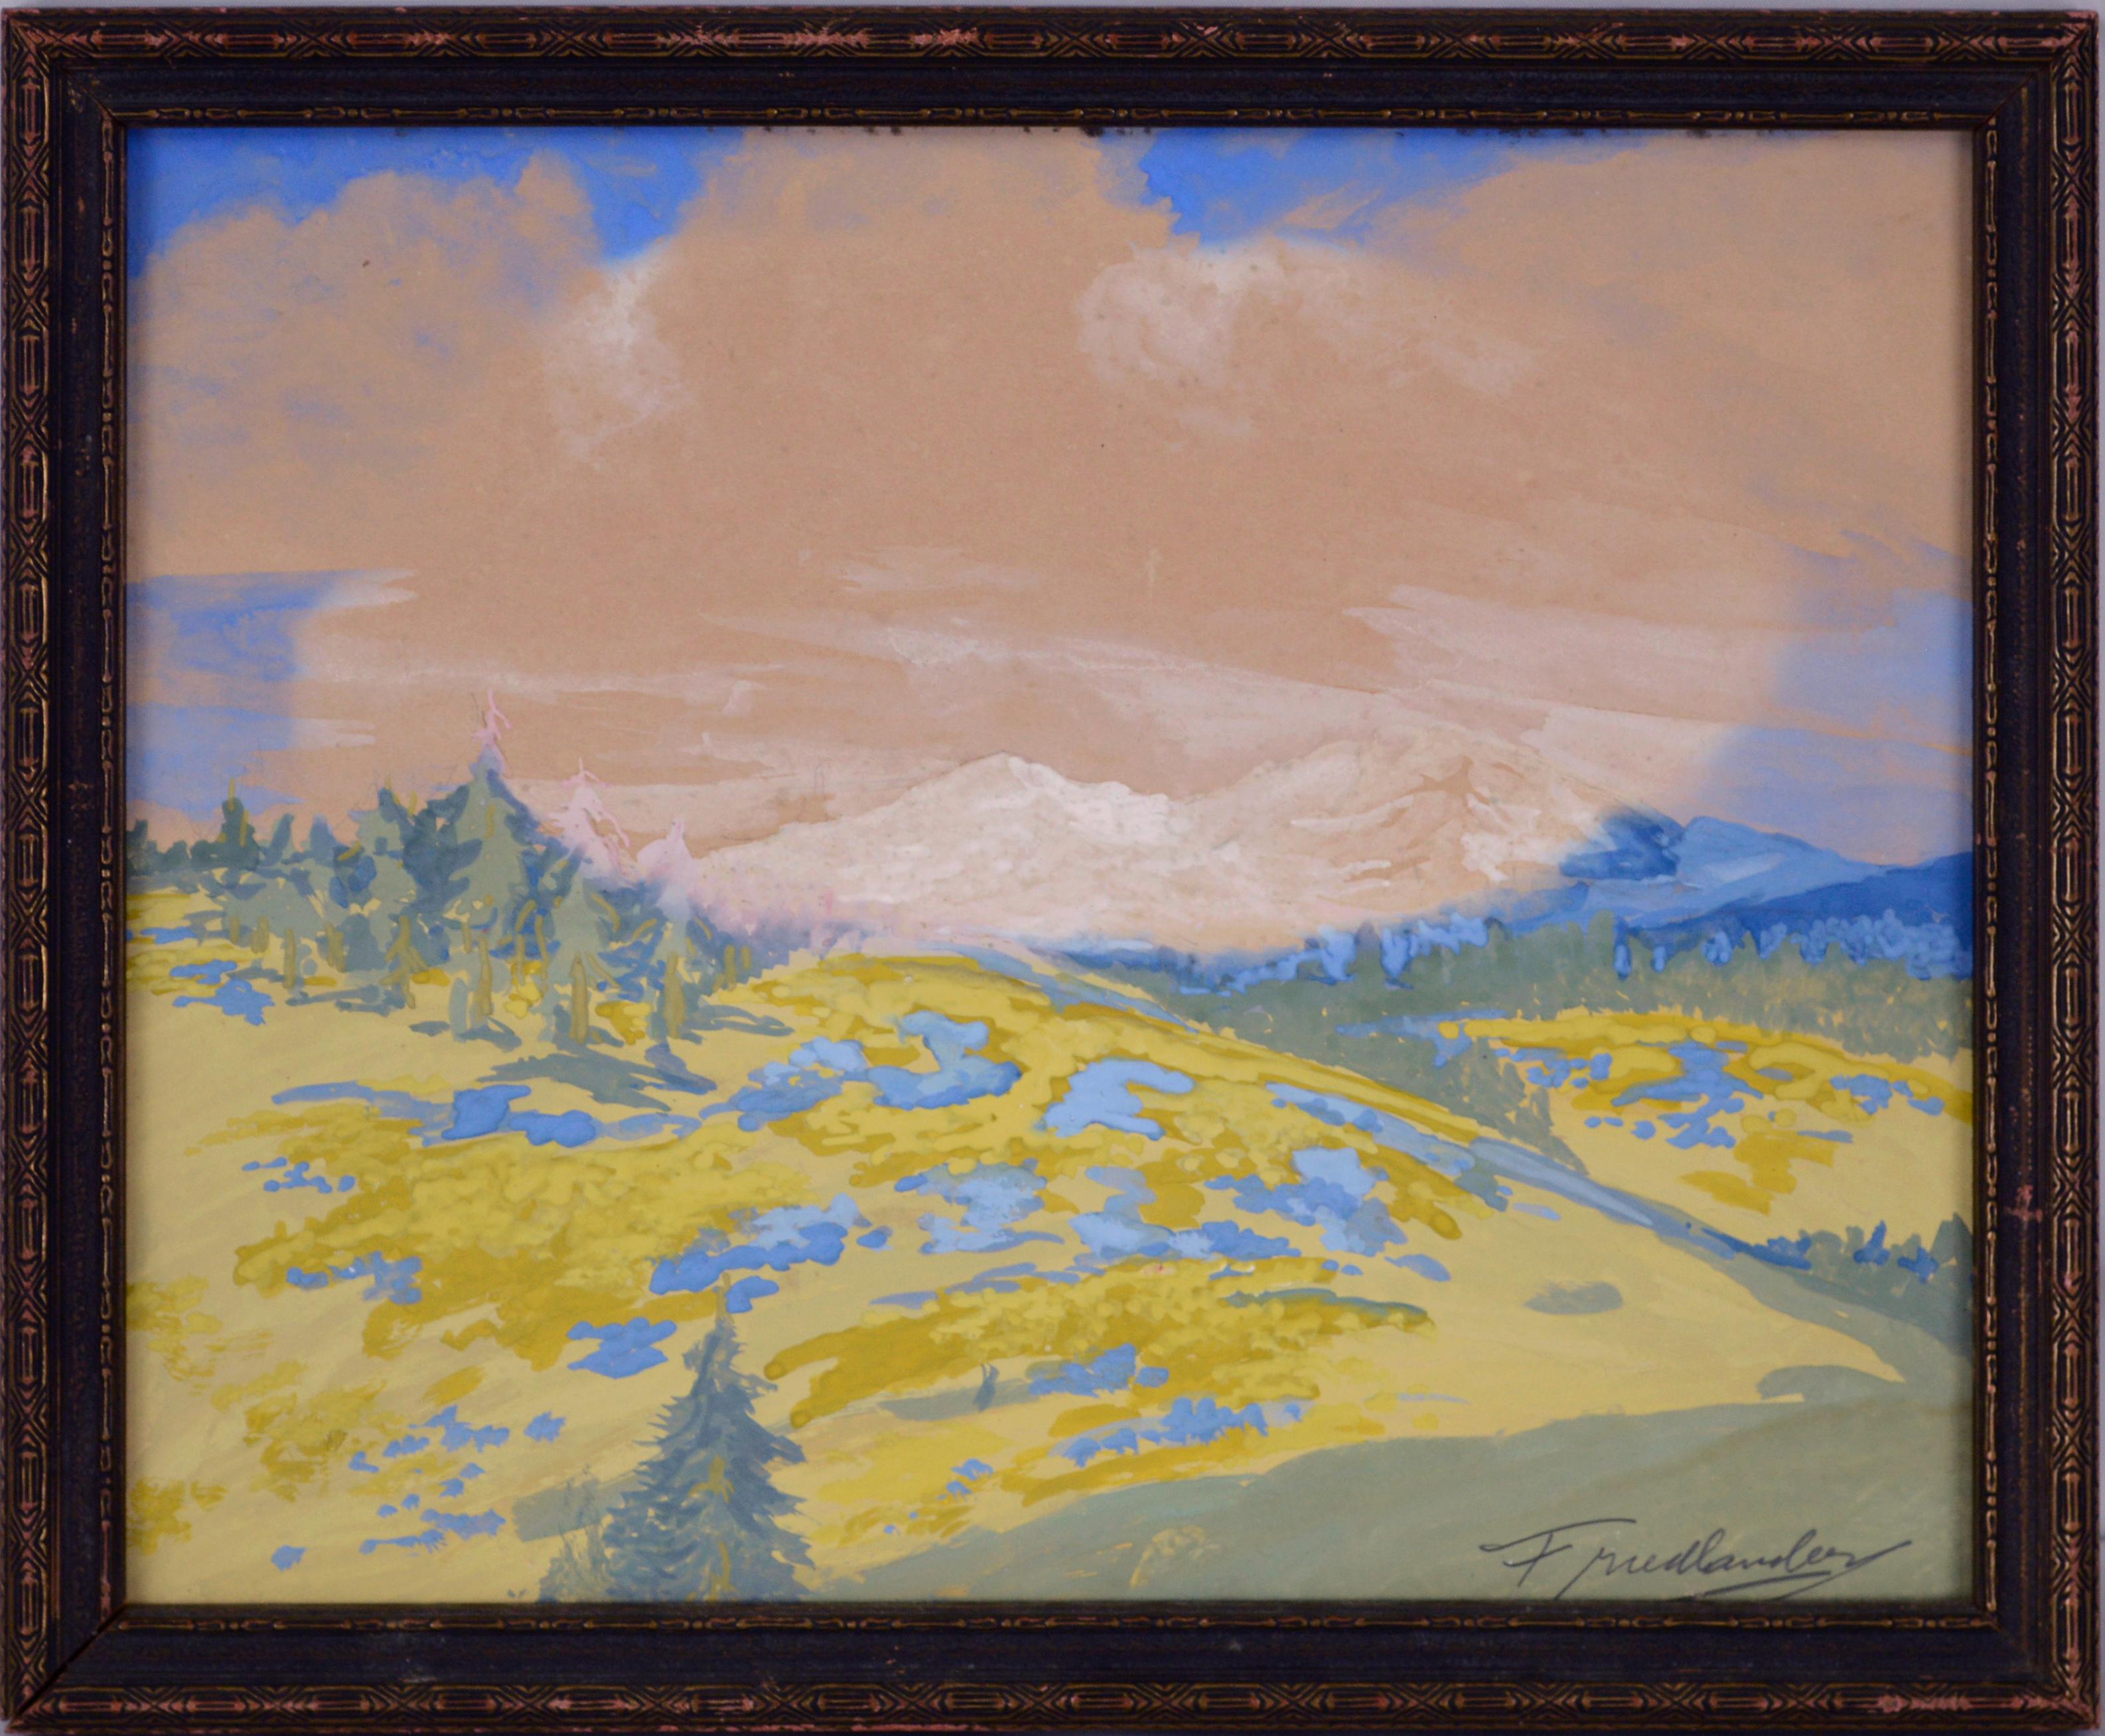 Spring in the Mountains by Friedlander 1920s